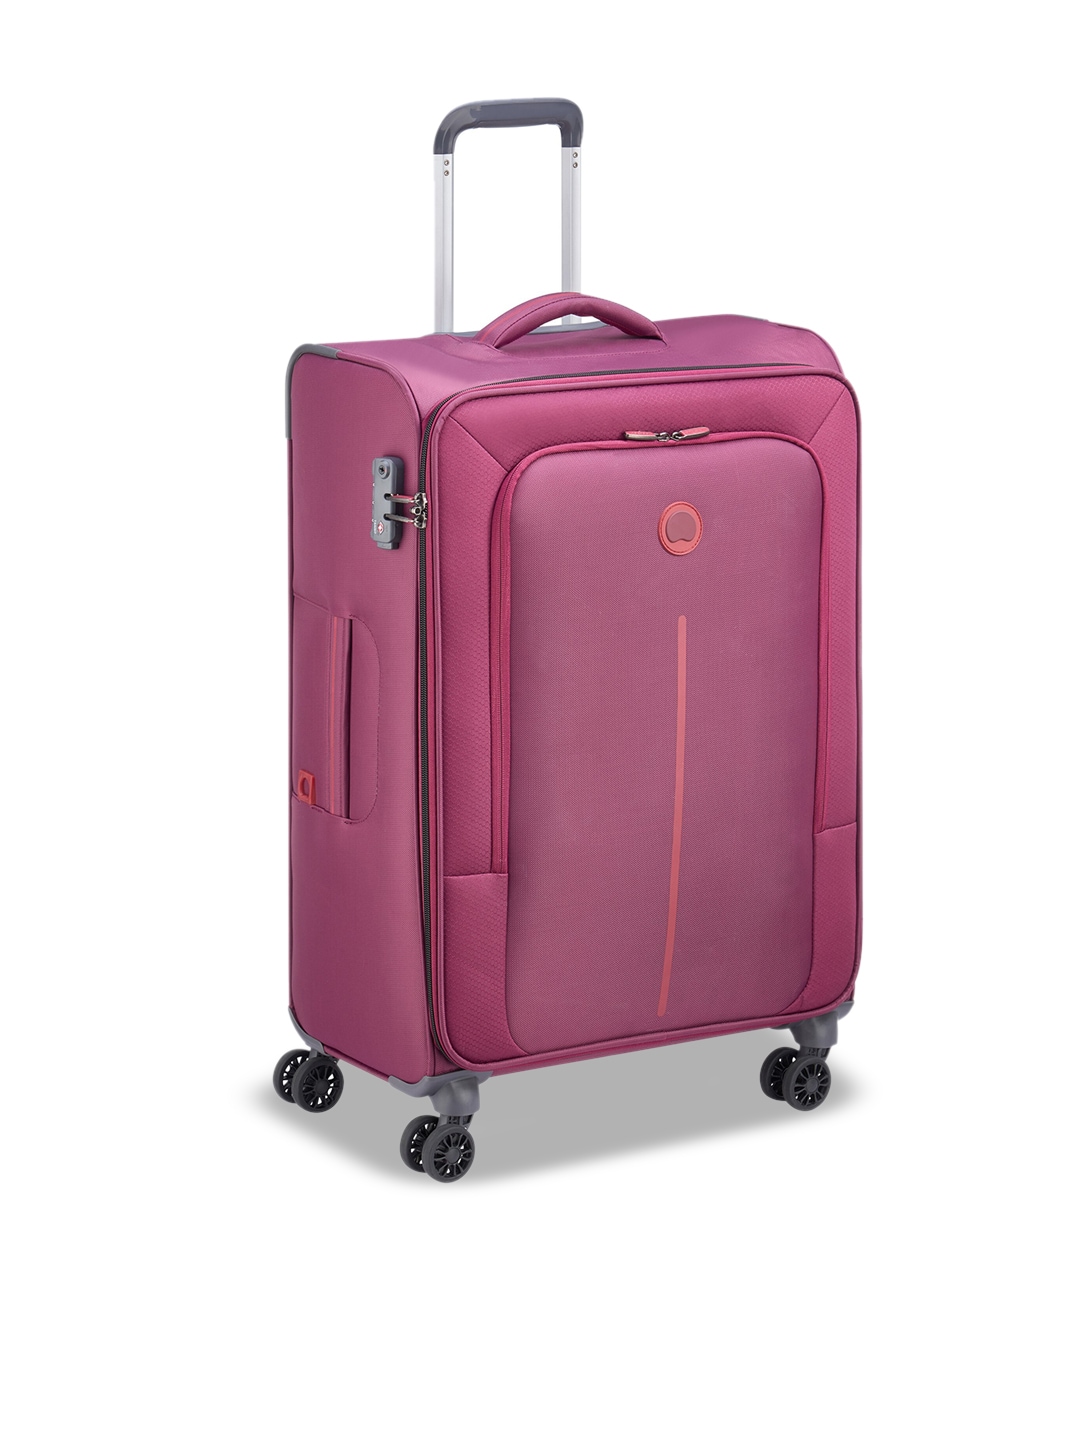 DELSEY Caracas Soft-Sided Large Trolley Suitcase, Purple